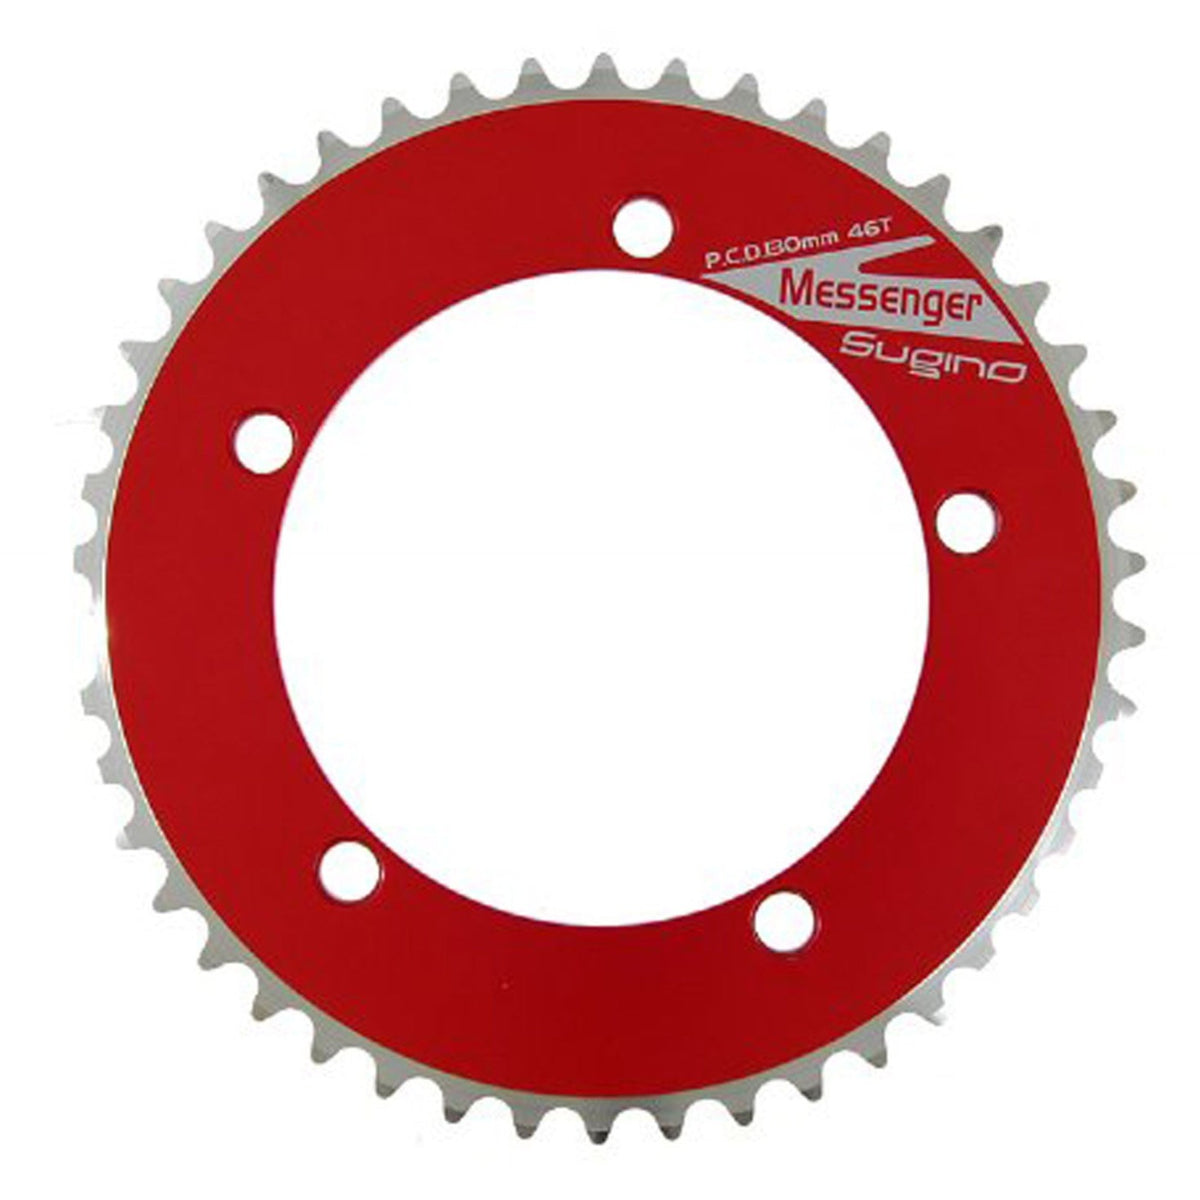 NOS Sugino Messenger fixed gear track chainring - anodized colors